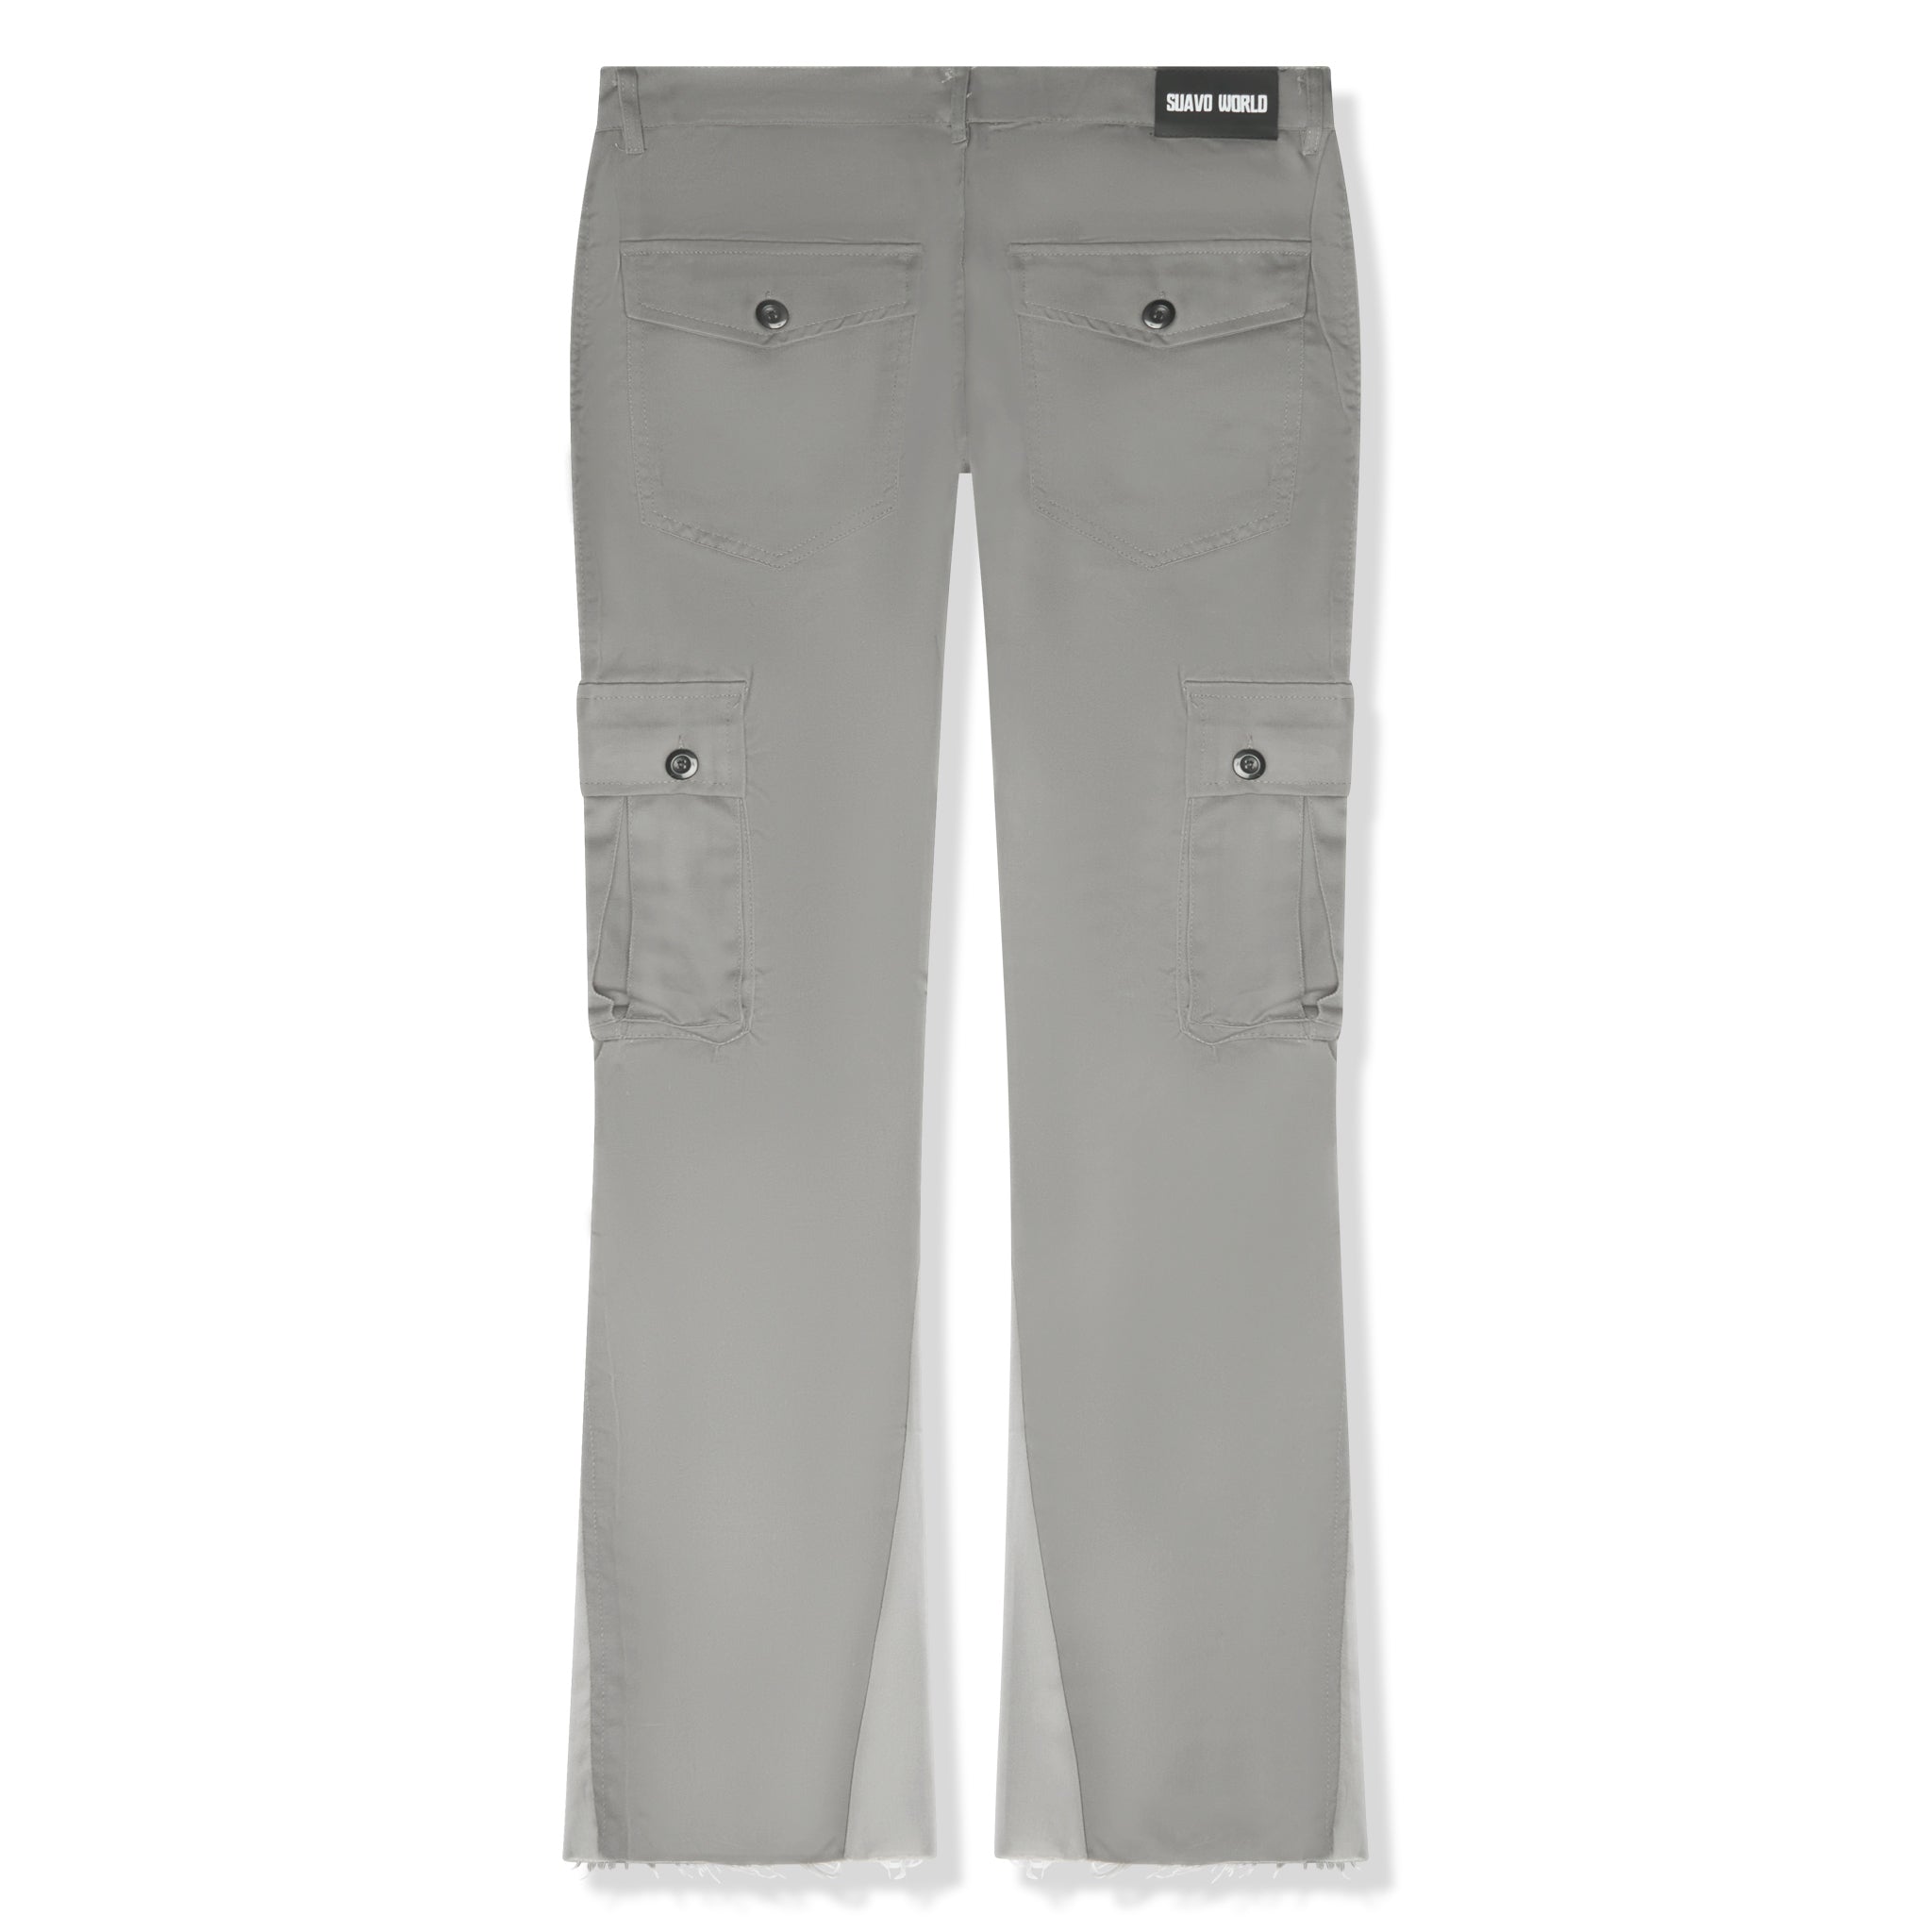 Back view of Suavo World Cargo Flare Trousers Grey